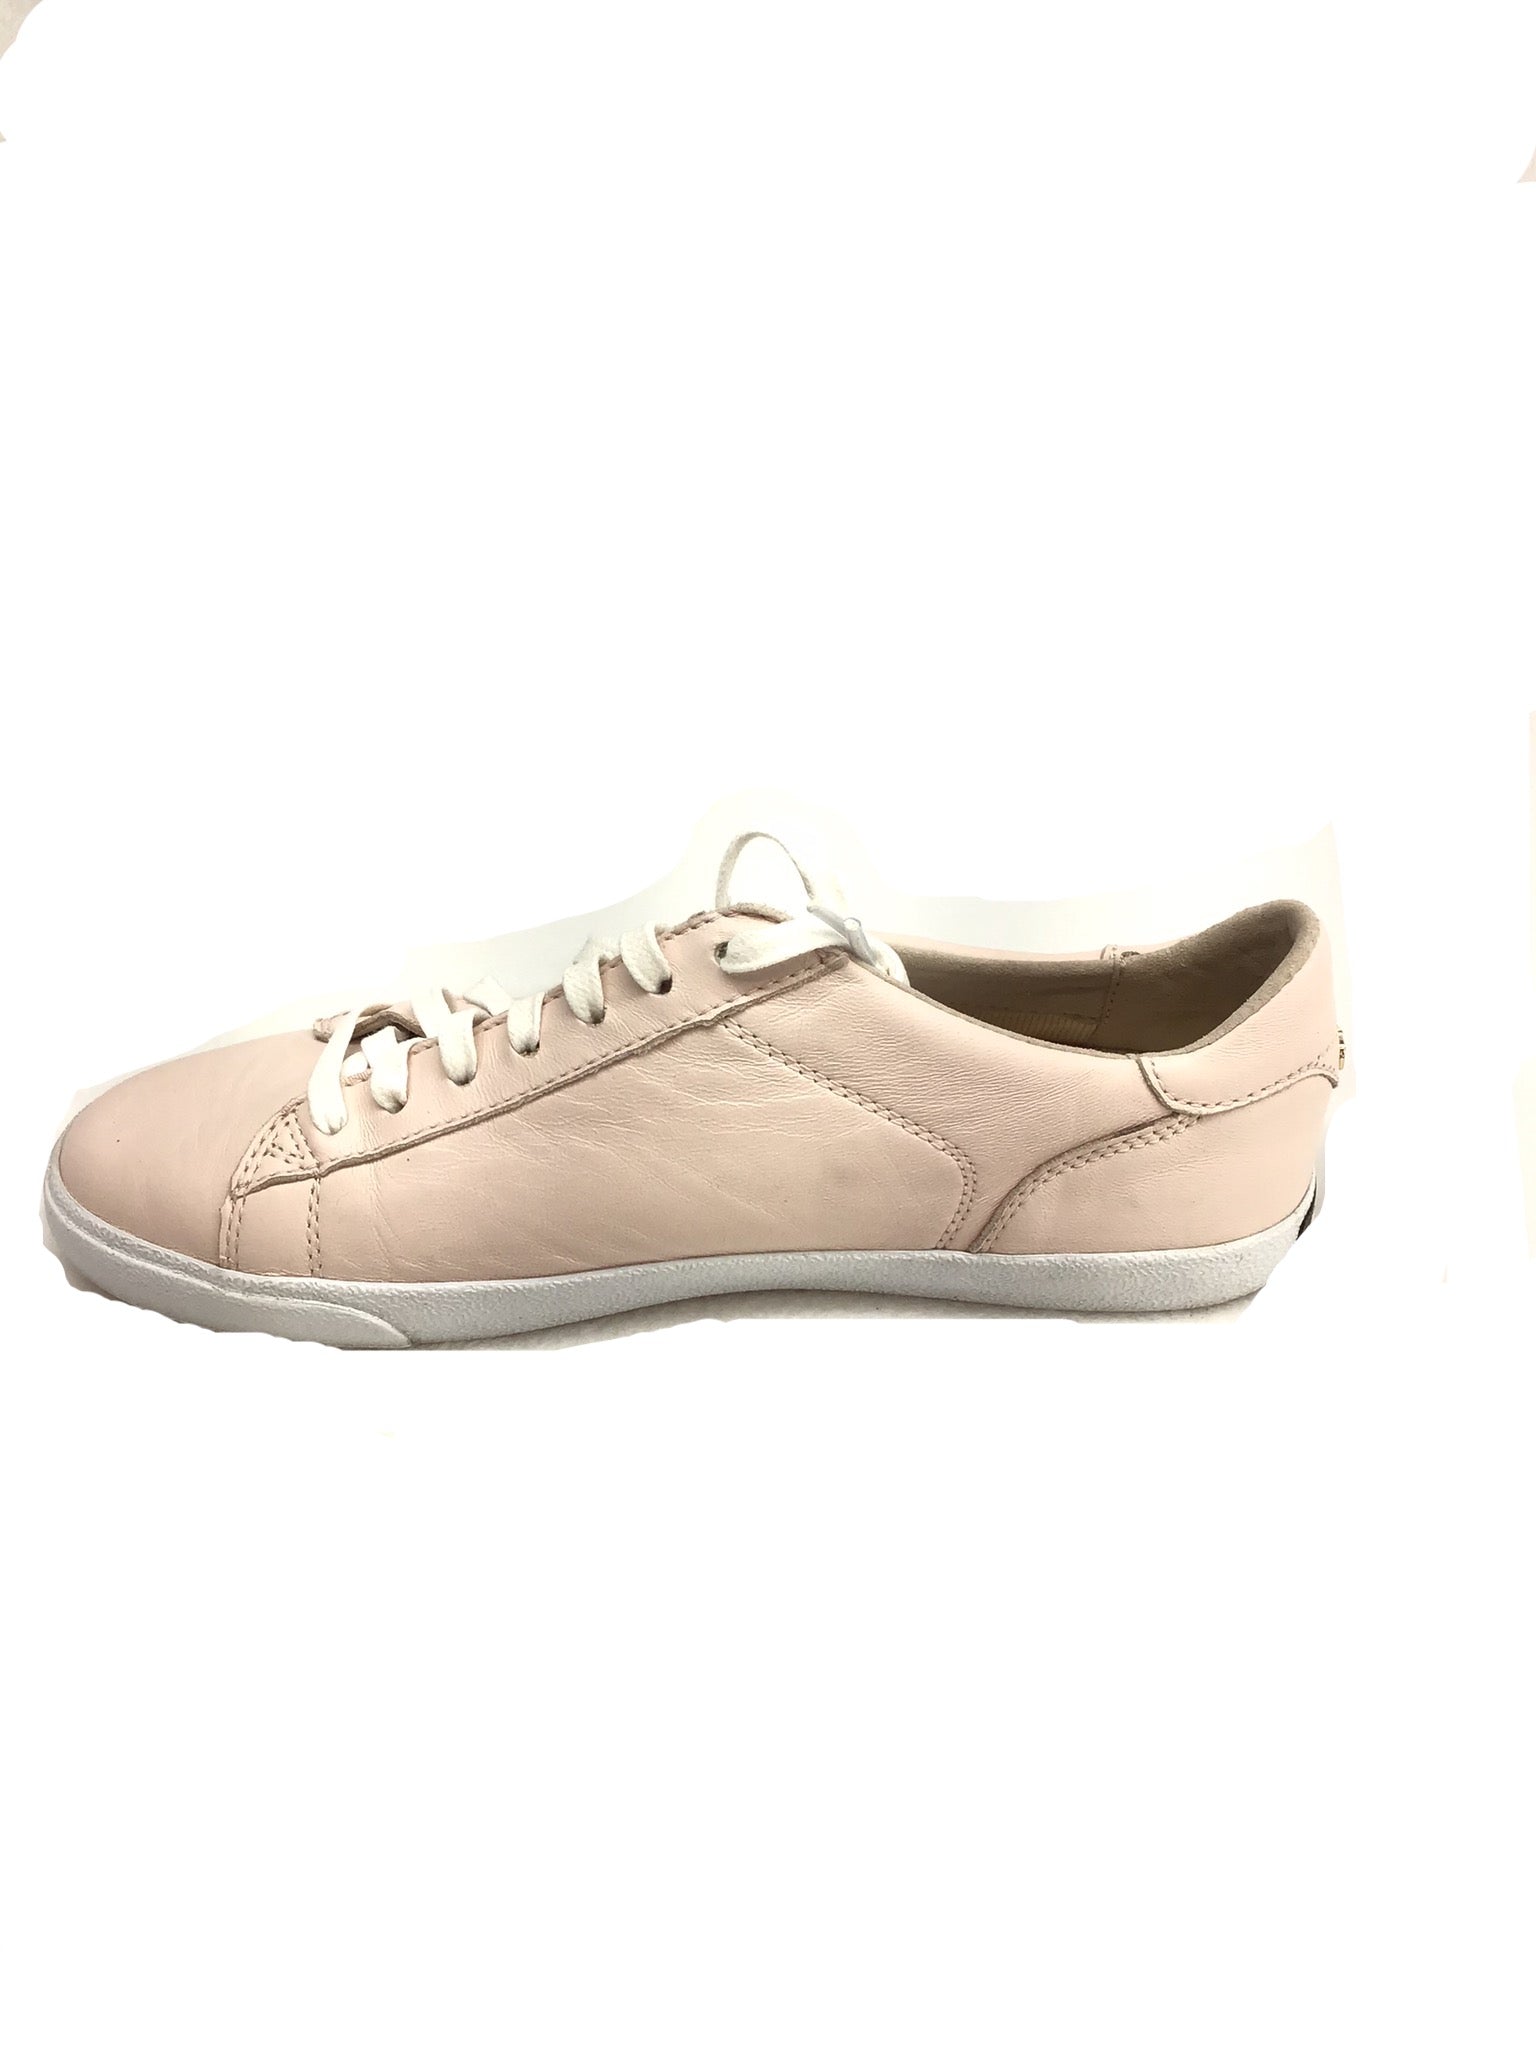 Cole Haan Sneakers Size 8B